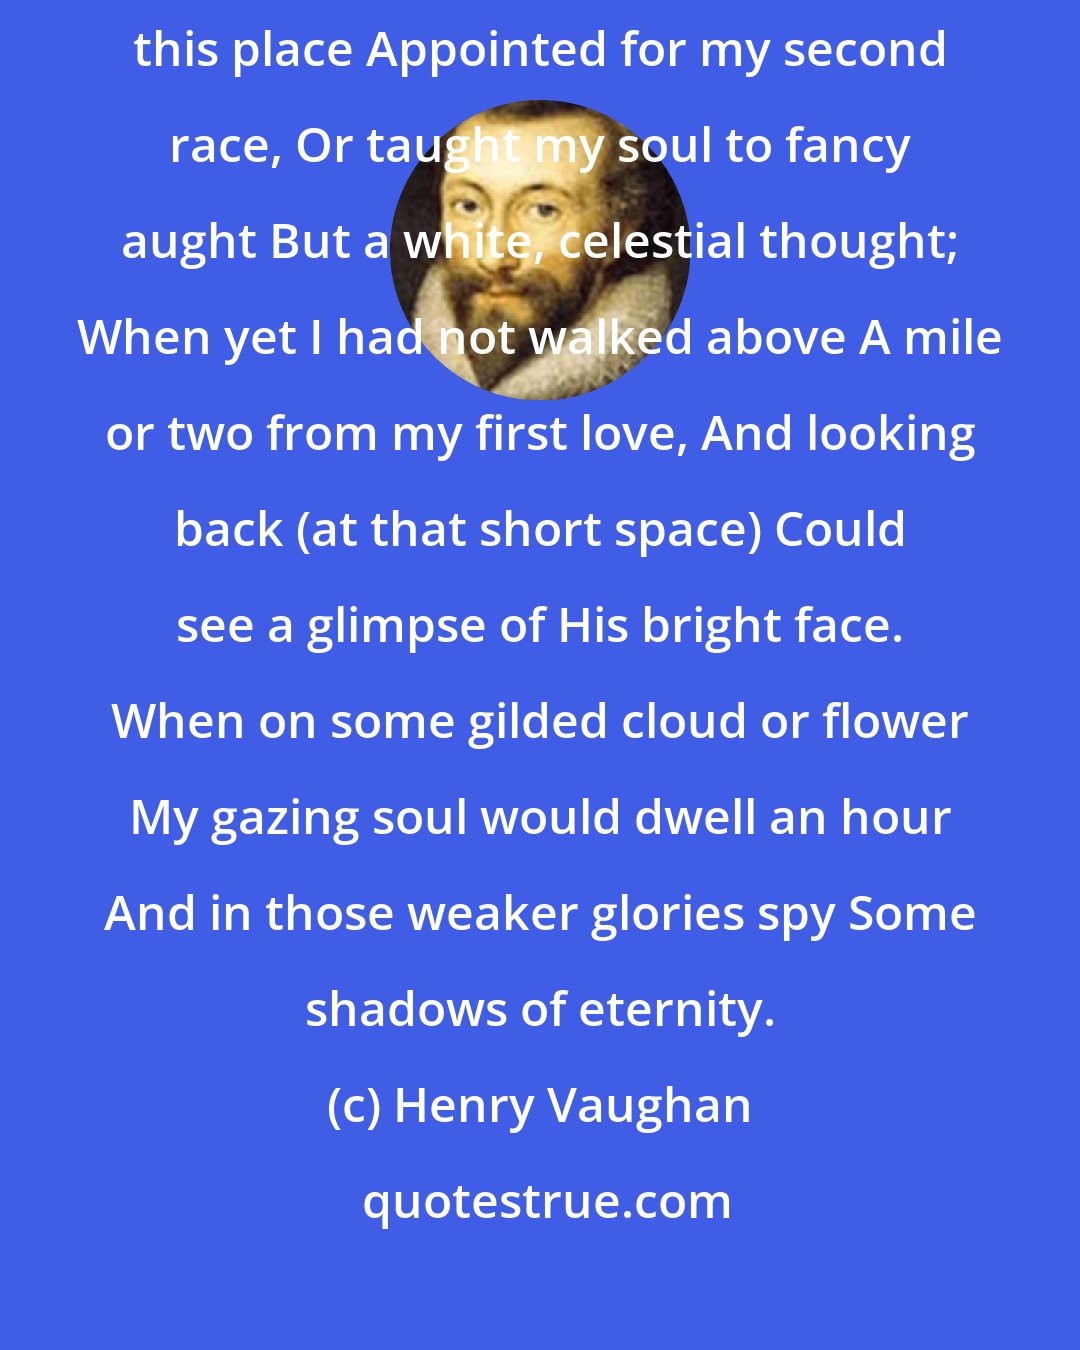 Henry Vaughan: Happy those early days when I Shined in my Angel-infancy. Before I understood this place Appointed for my second race, Or taught my soul to fancy aught But a white, celestial thought; When yet I had not walked above A mile or two from my first love, And looking back (at that short space) Could see a glimpse of His bright face. When on some gilded cloud or flower My gazing soul would dwell an hour And in those weaker glories spy Some shadows of eternity.